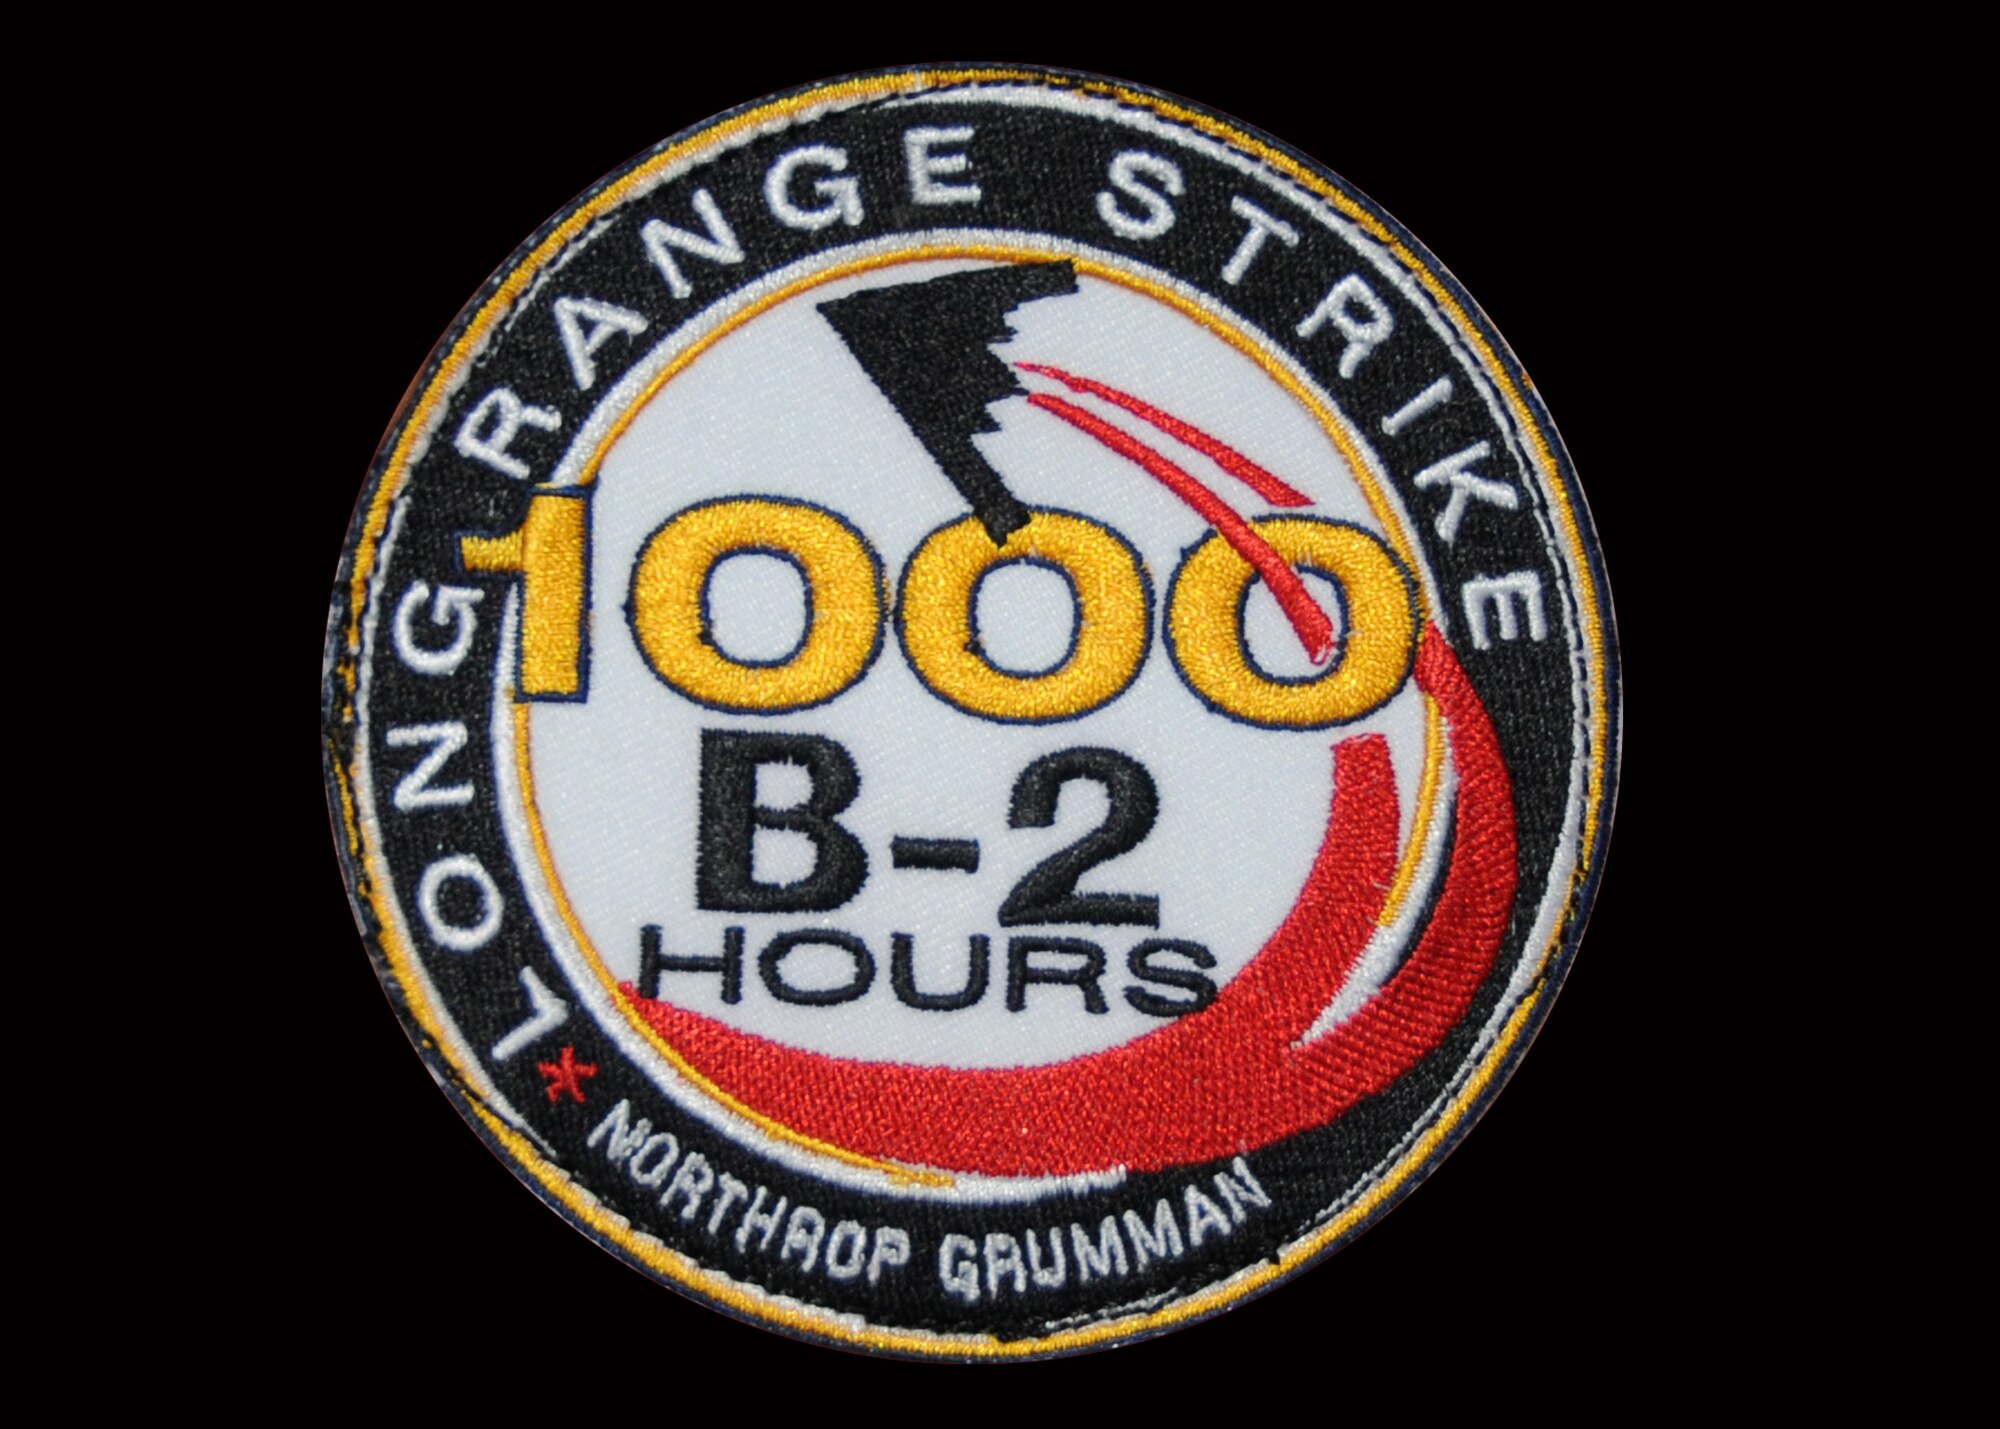 A closeup of the 1000 hours flying patch worn by B-2 pilots who have achieved this milestone in flying the B-2 bomber. There are almost 500 pilots who have flown the B-2 Spirit, but only about 30 who have reached 1,000 flying hours.  Four of these elite pilots are 131st Bomb Wing Missouri Air National Guard members at Whiteman Air Force Base, Mo:  Lt. Col. Michael Means who achieved this milestone almost three years ago while on active duty; Lt. Col. Rhett Binger, Jun 2009; and Maj. Jared Kennish, Oct.2009; and Maj. John Avery, Mar. 2010. (Air Force Photo by Master Sgt. Mary-Dale Amison.  RELEASED)